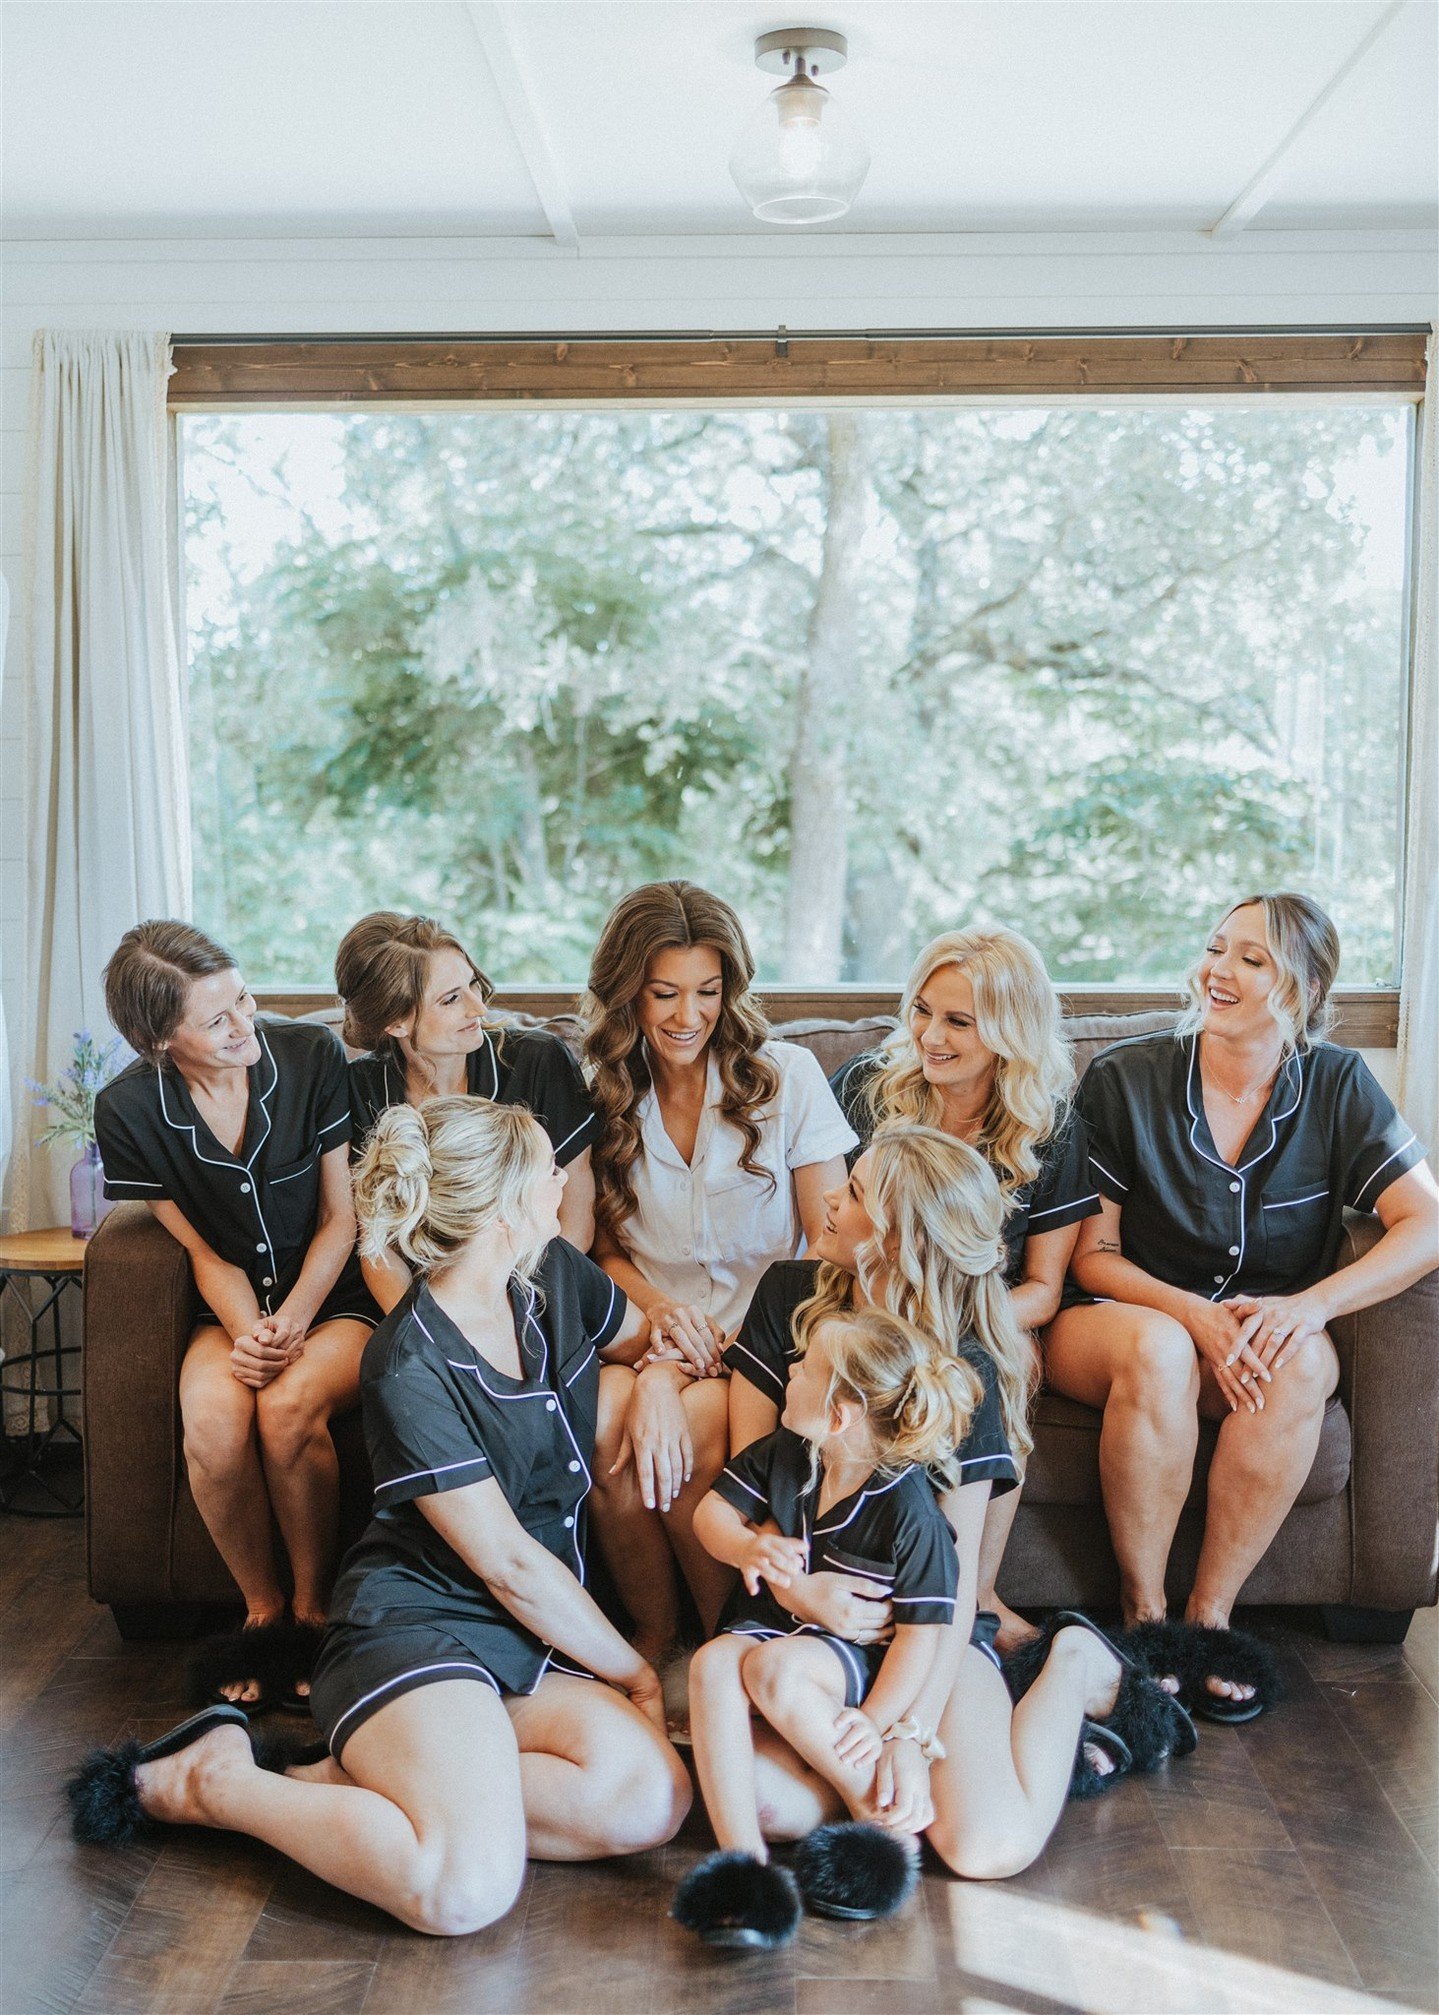 Getting ready with your girl gang is always fun! You spend the day in our private bridal suite laughing and enjoying girl time before you say I Do! 

Photo: @timwatersweddings 

#allinclusiveweddings #weddingplanning #engagedintexas #weddingvenues #b